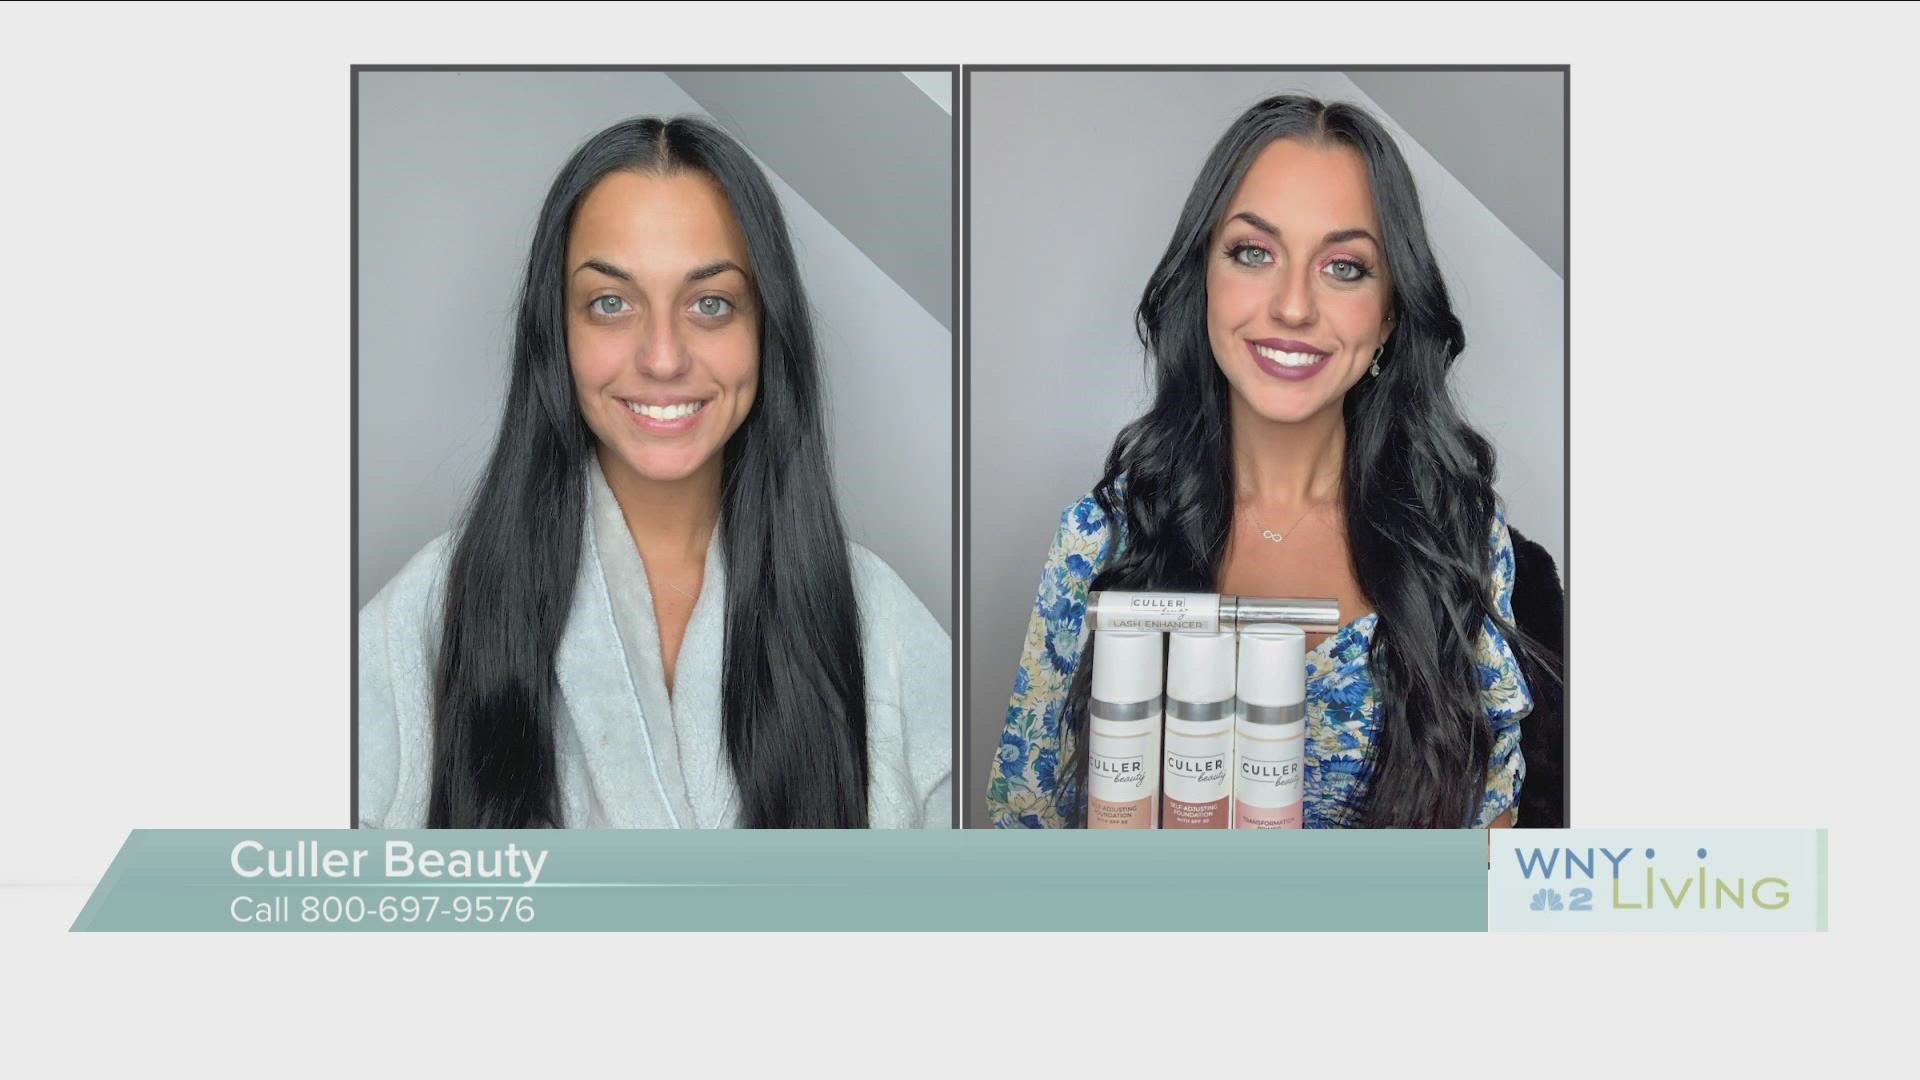 WNY Living - October 1 - Culler Beauty (THIS VIDEO IS SPONSORED BY CULLER BEAUTY)